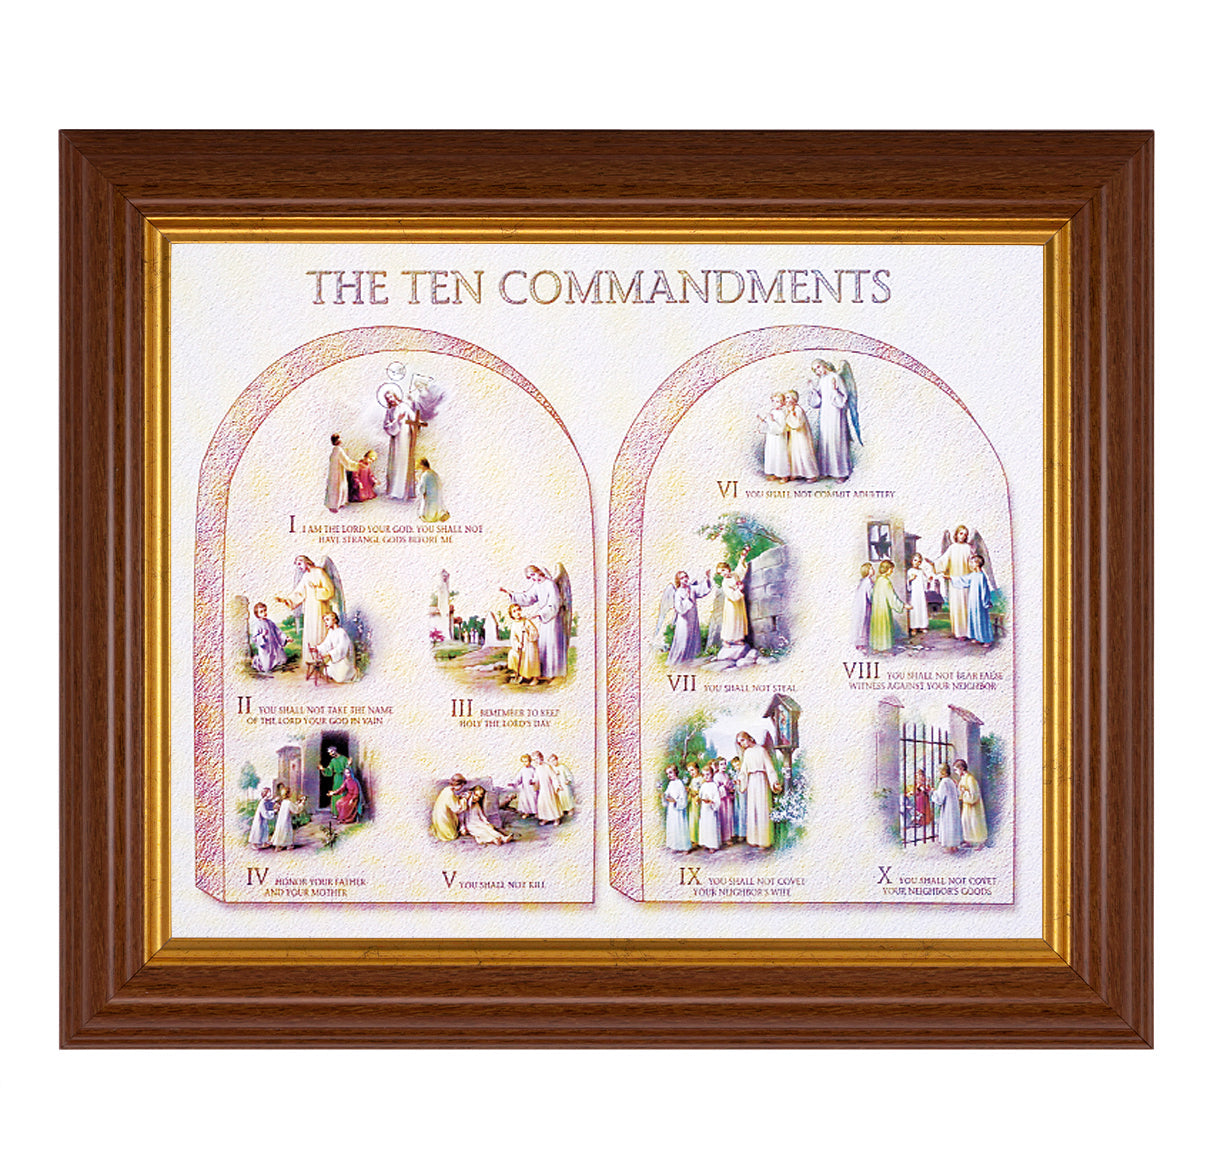 Ten Commandments Picture Framed Wall Art Decor, Large, Traditional Dark Walnut Fluted Frame with Gold Beaded Lip